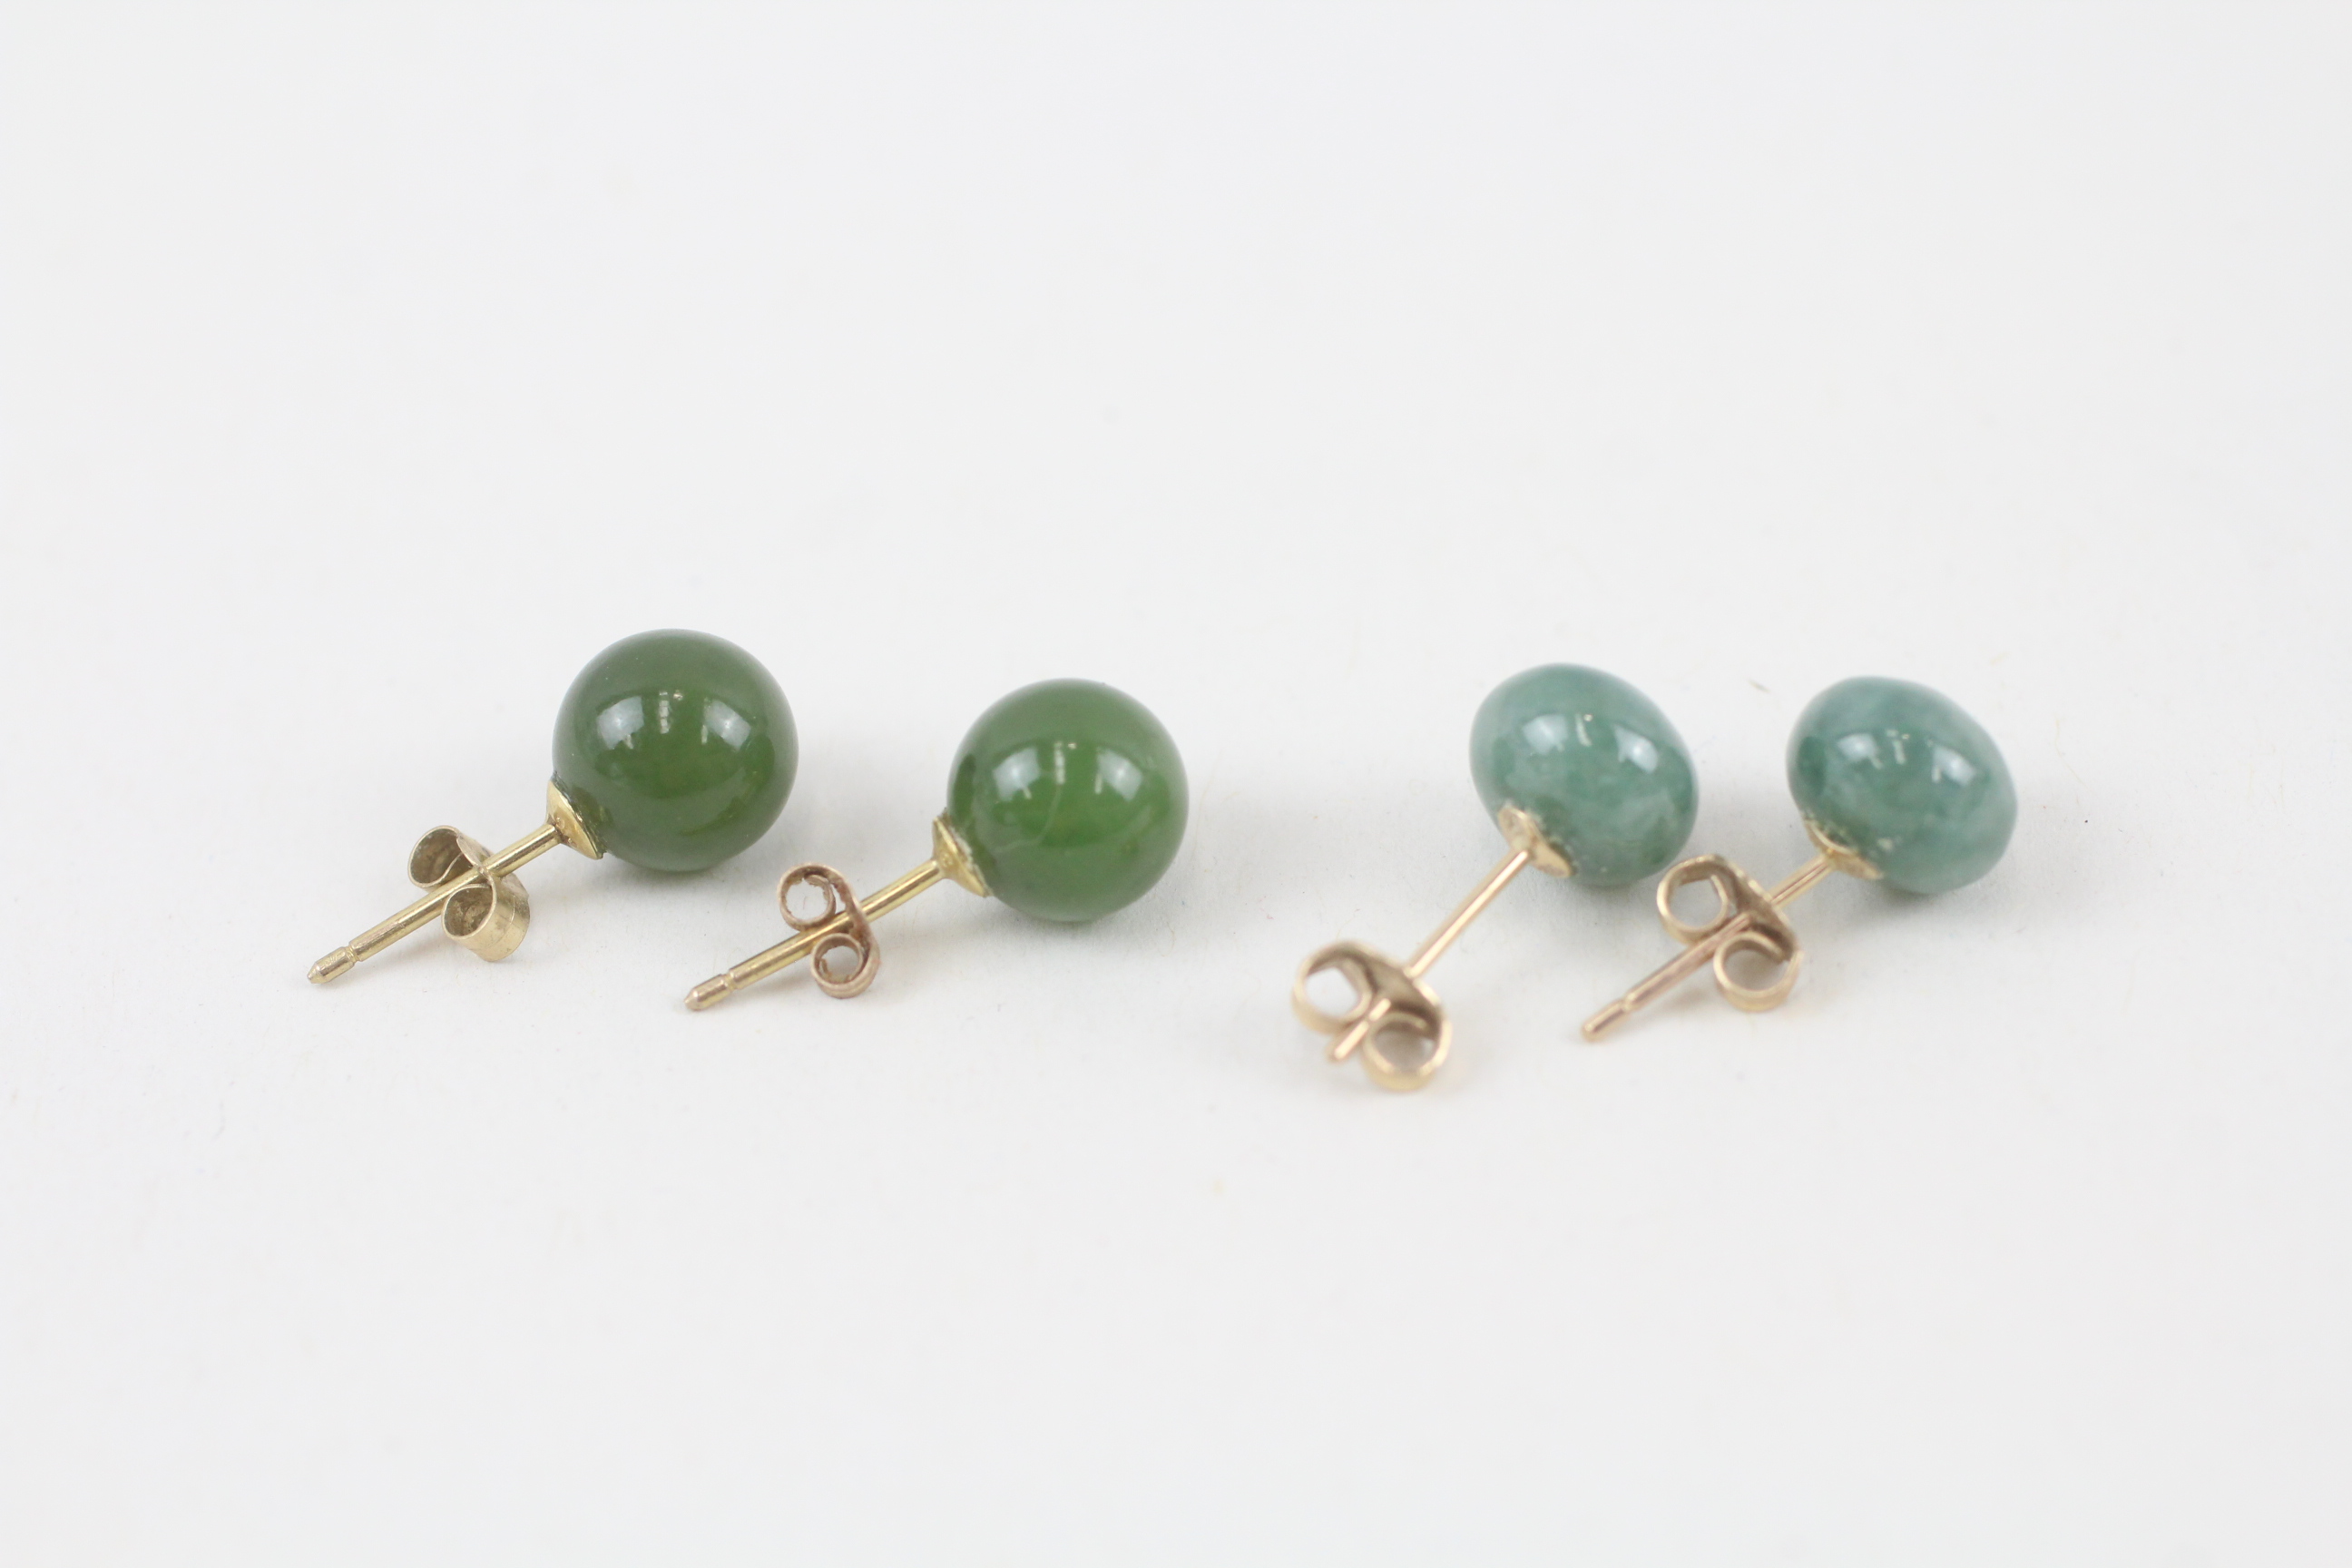 2x 9ct gold nephrite & jade stud earrings with scroll backs - 3.7 g - Image 4 of 6